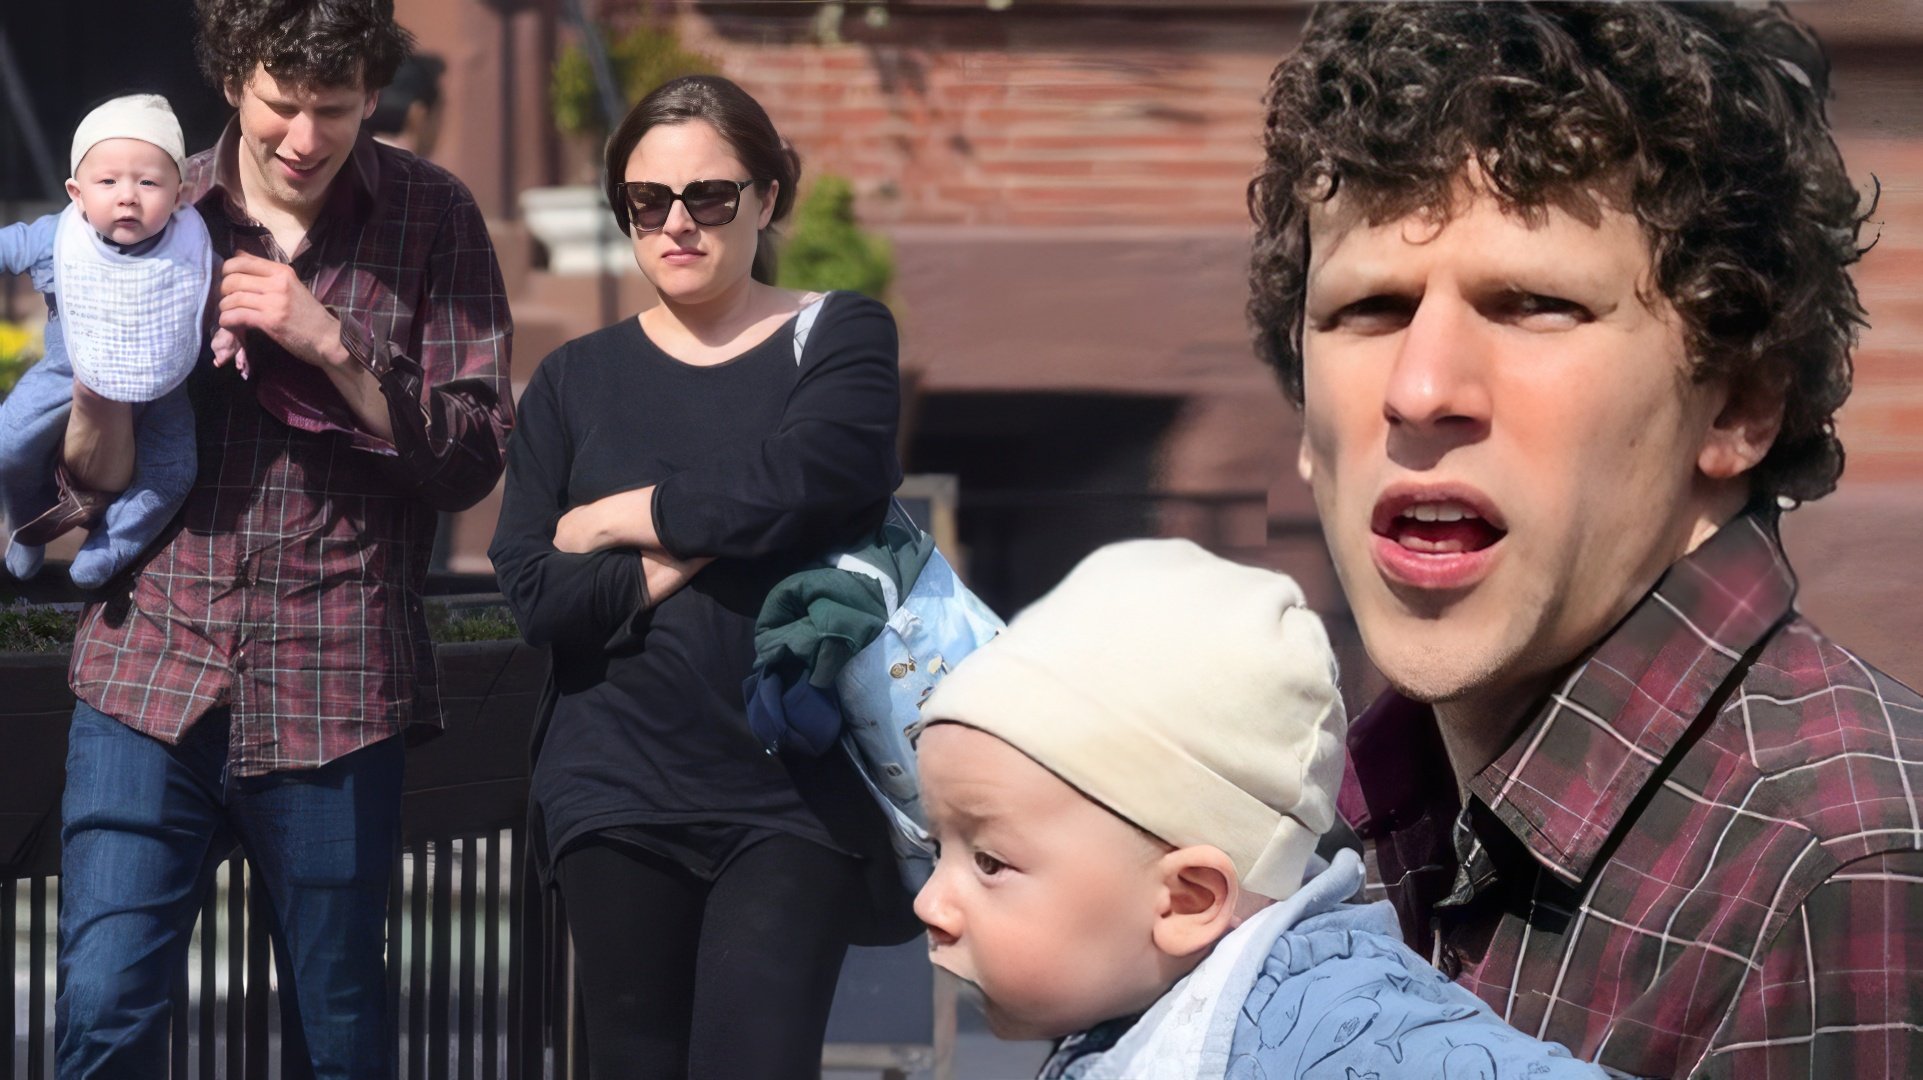 Jesse Eisenberg with his girlfriend and their son